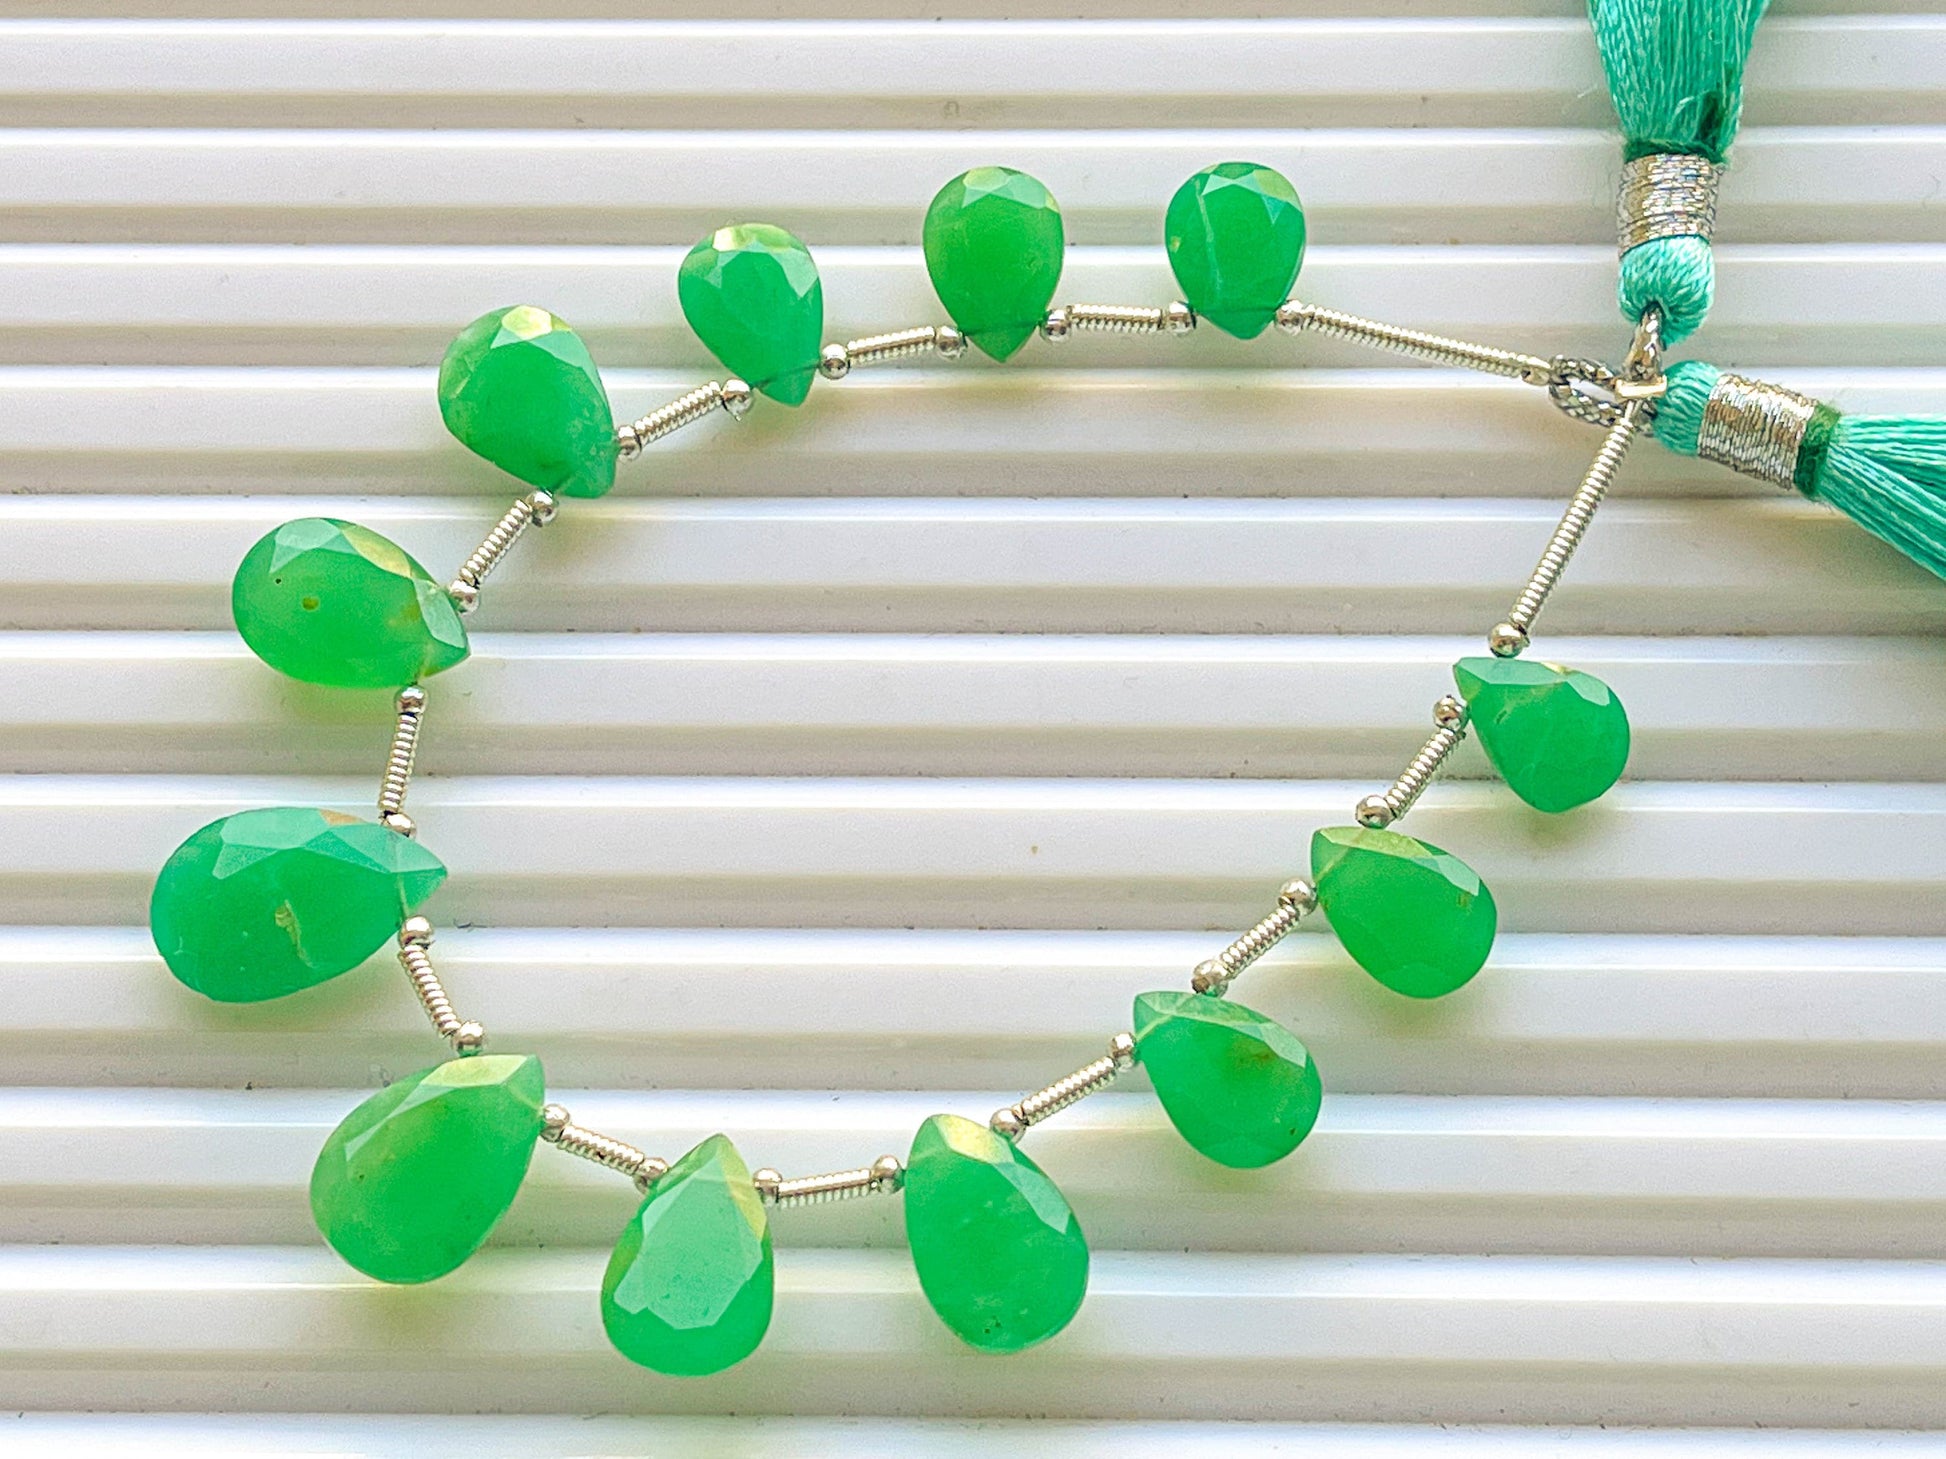 10 Pieces AAA Australian Chrysoprase Pear Shape Cut Stone Beads, Natural Chrysoprase Gemstone, Chrysoprase Briolette Beads, 7x9mm to 9x15mm Beadsforyourjewelry